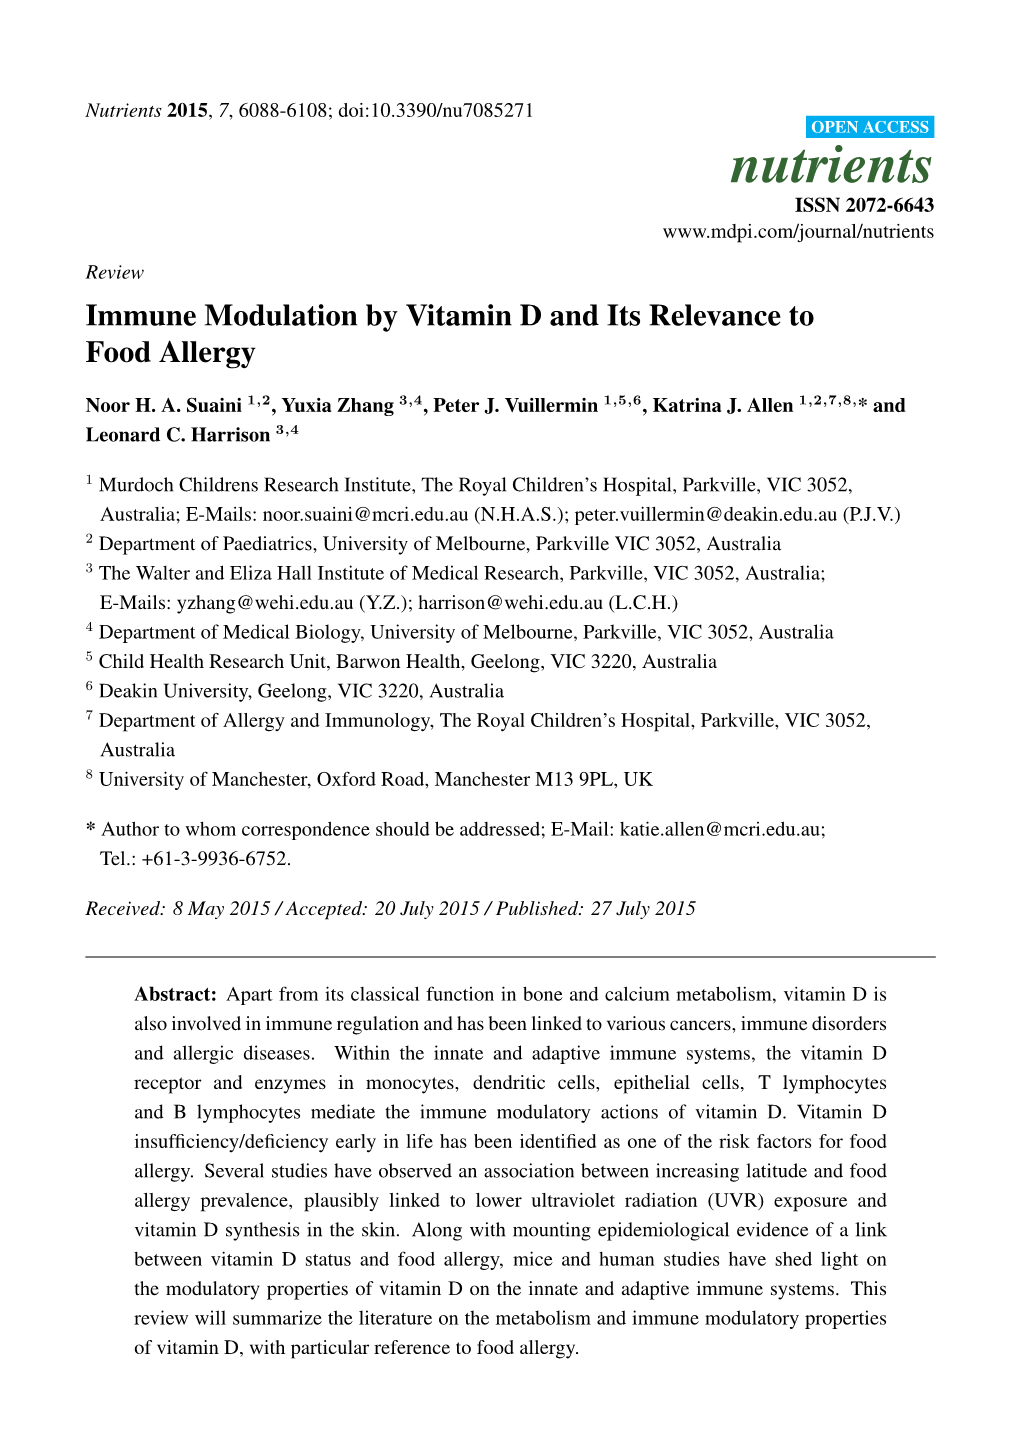 Immune Modulation by Vitamin D and Its Relevance to Food Allergy